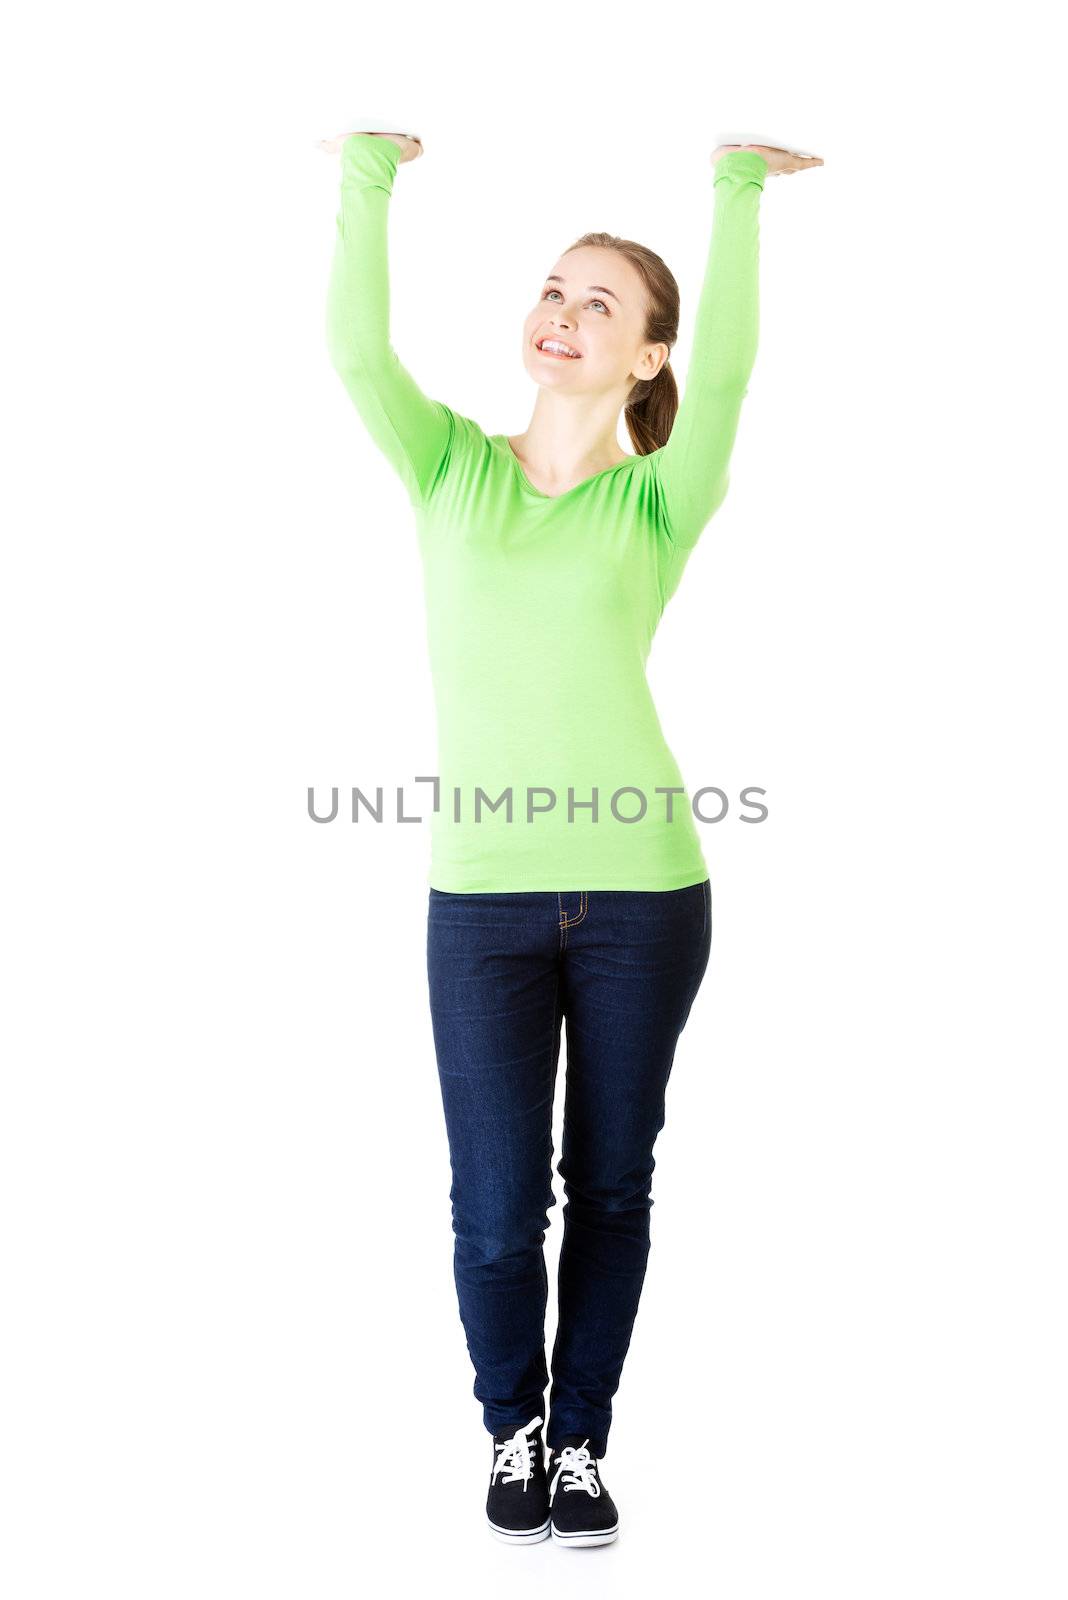 Smiling young woman is holding something abstract above her head by BDS